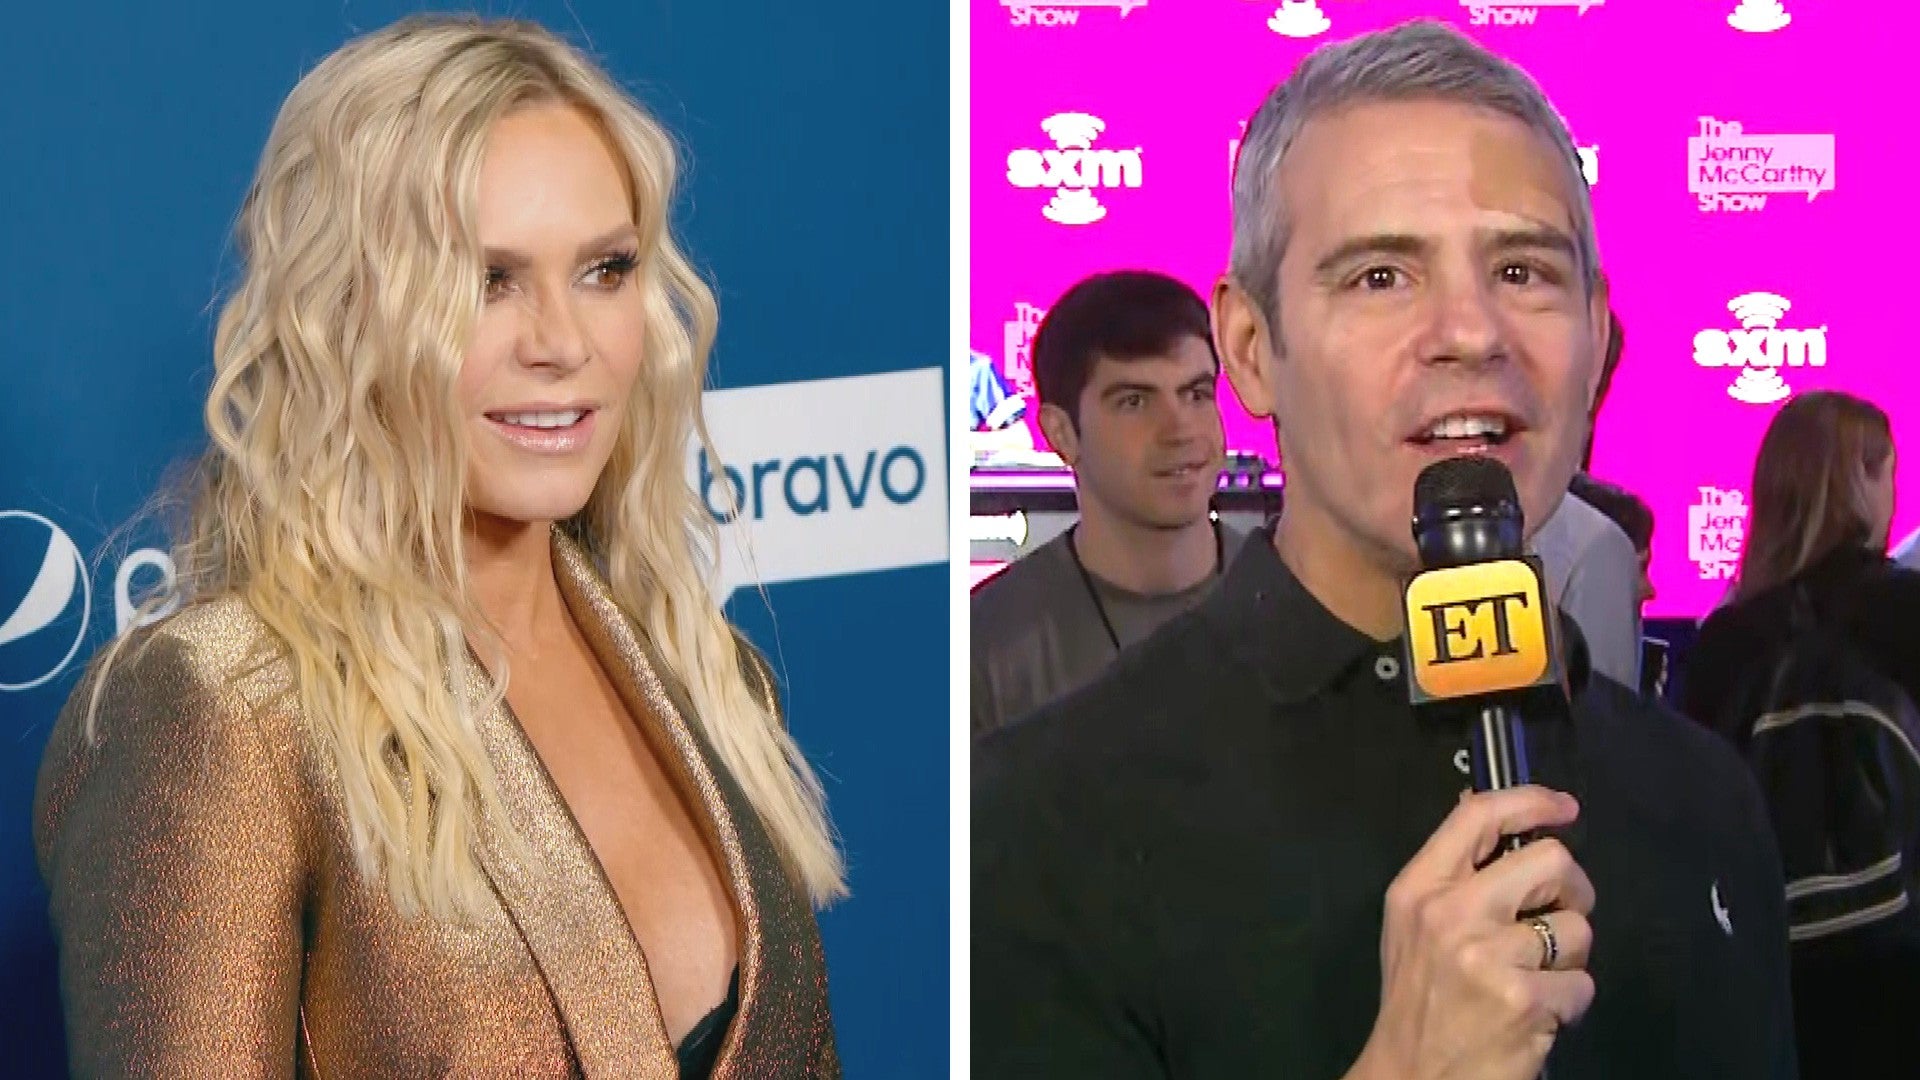 RHOC's Tamra Judge reveals bandages after breast implant removal surgery  and says she feels 'tired and sore